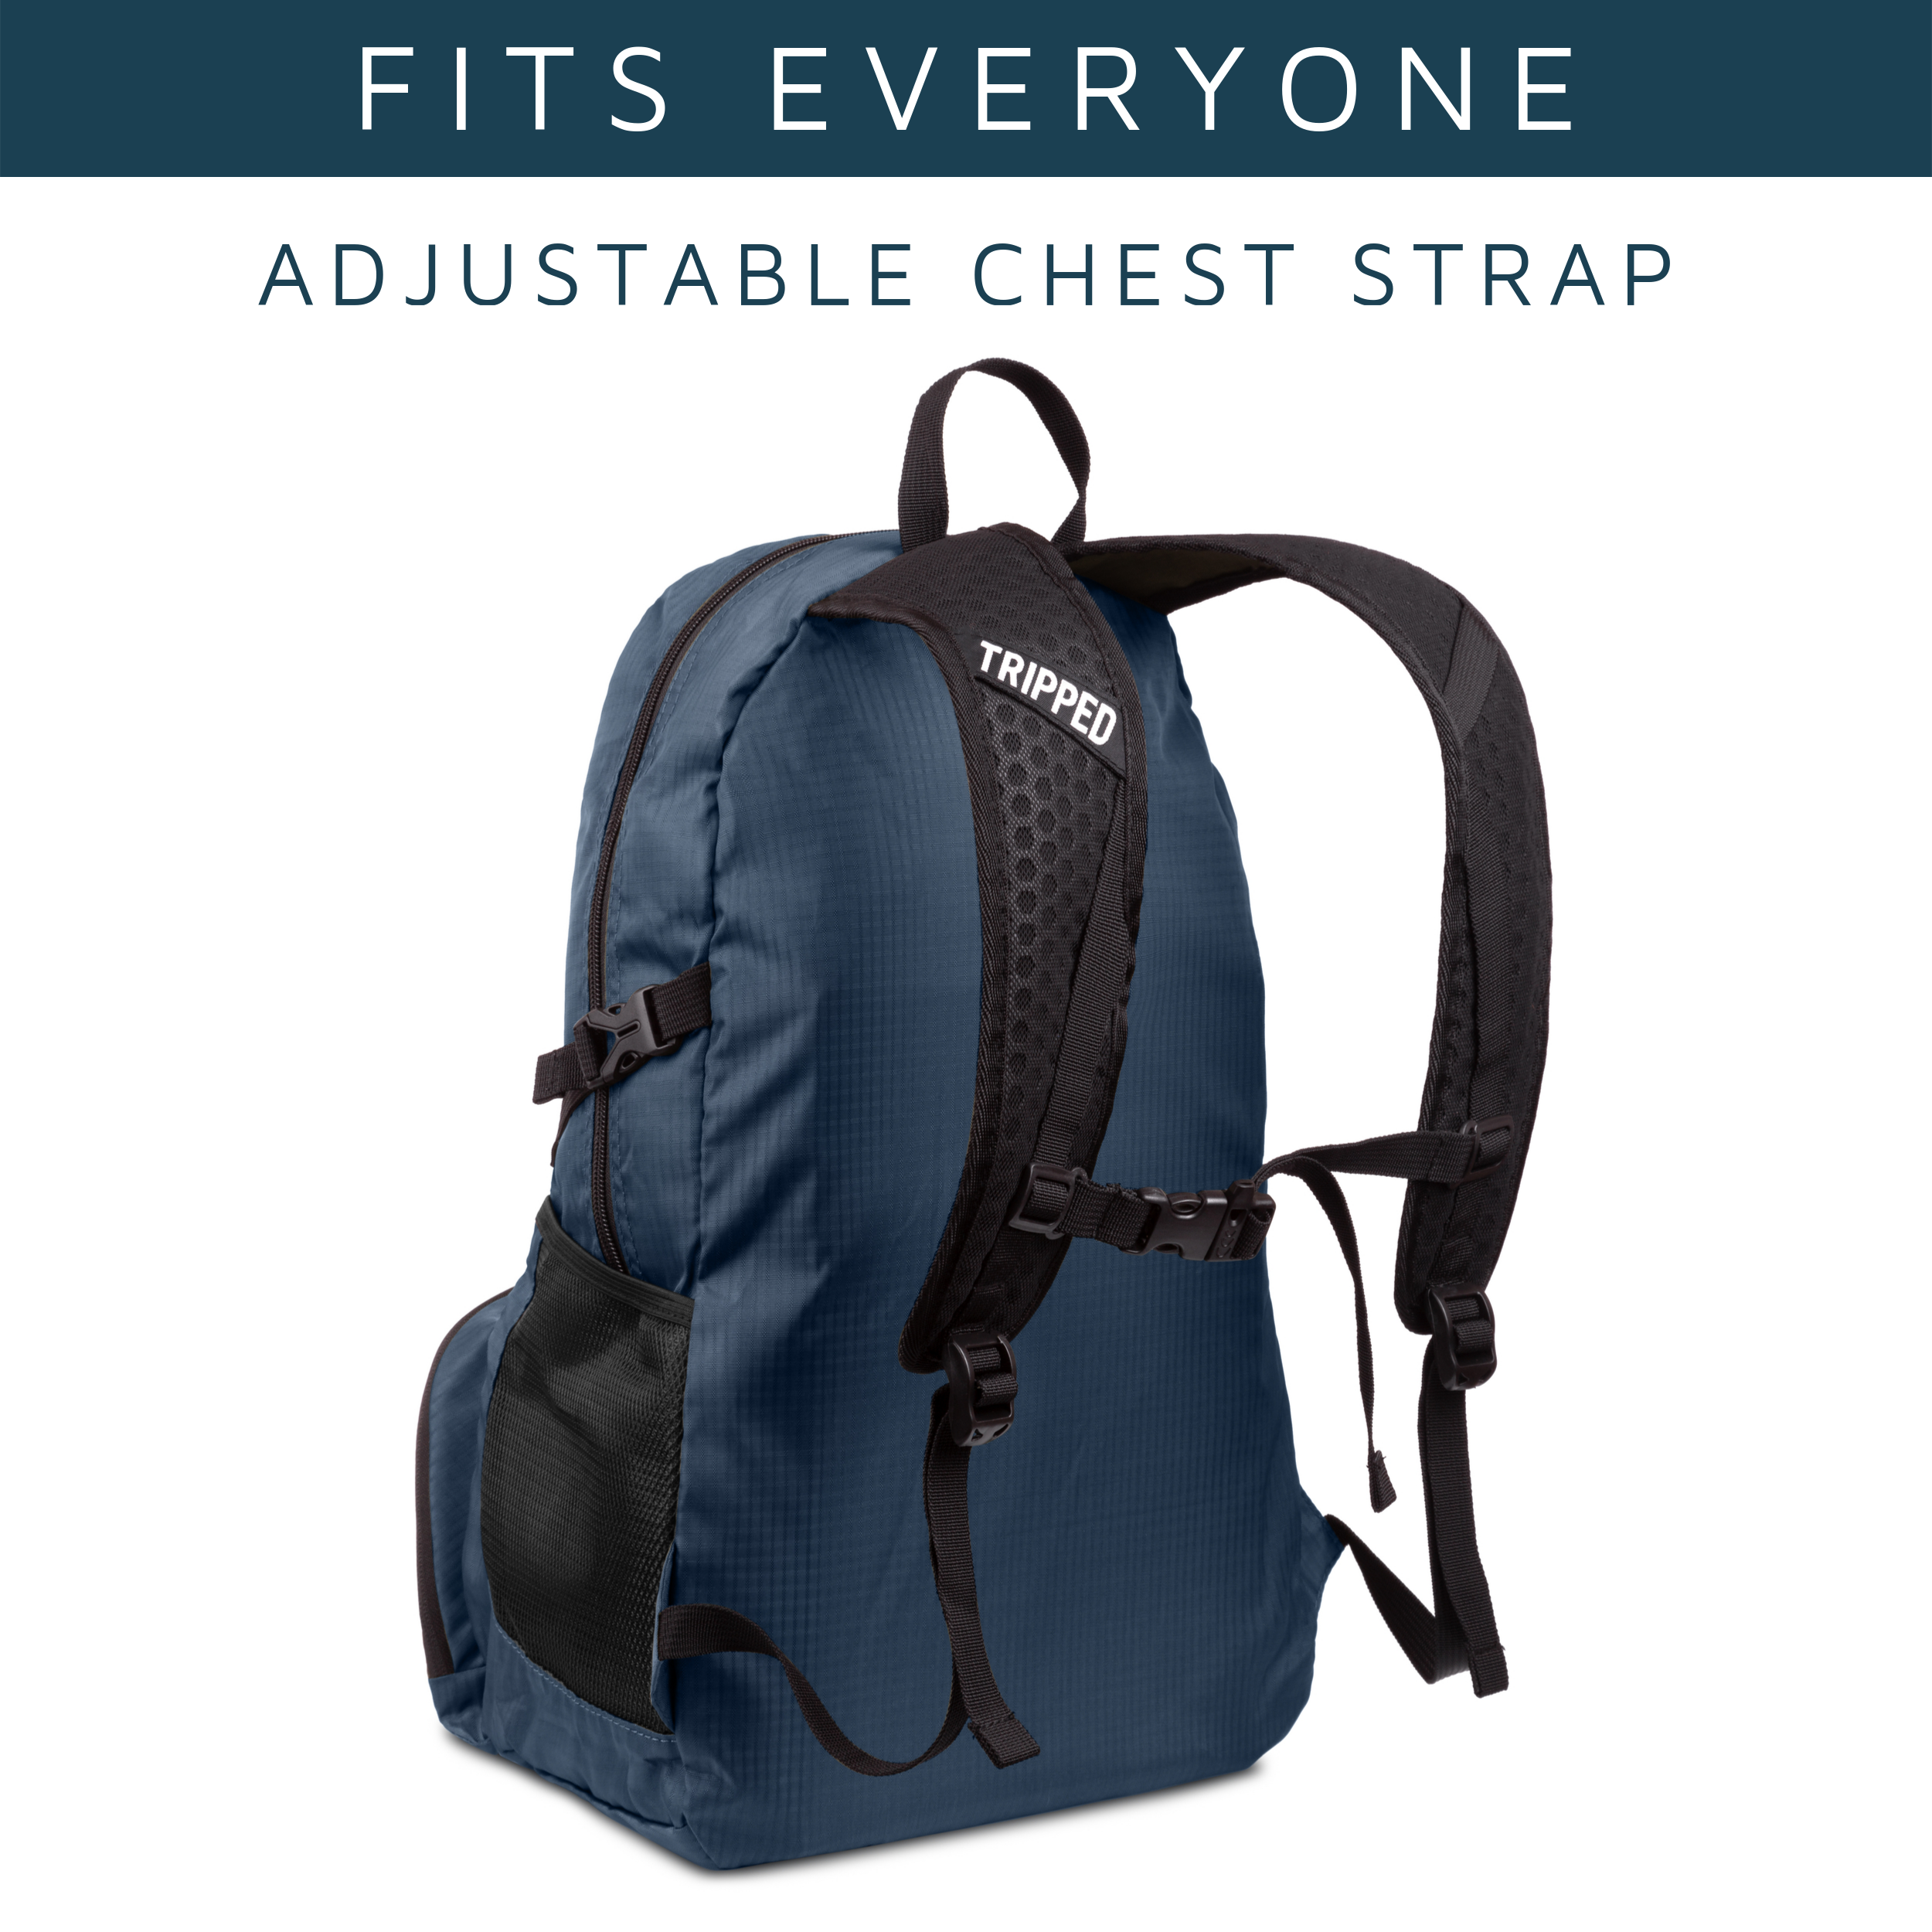 Foldable backpack for travel collapsible backpack packable lightweight travel hiking backpack daybag blue strap.png